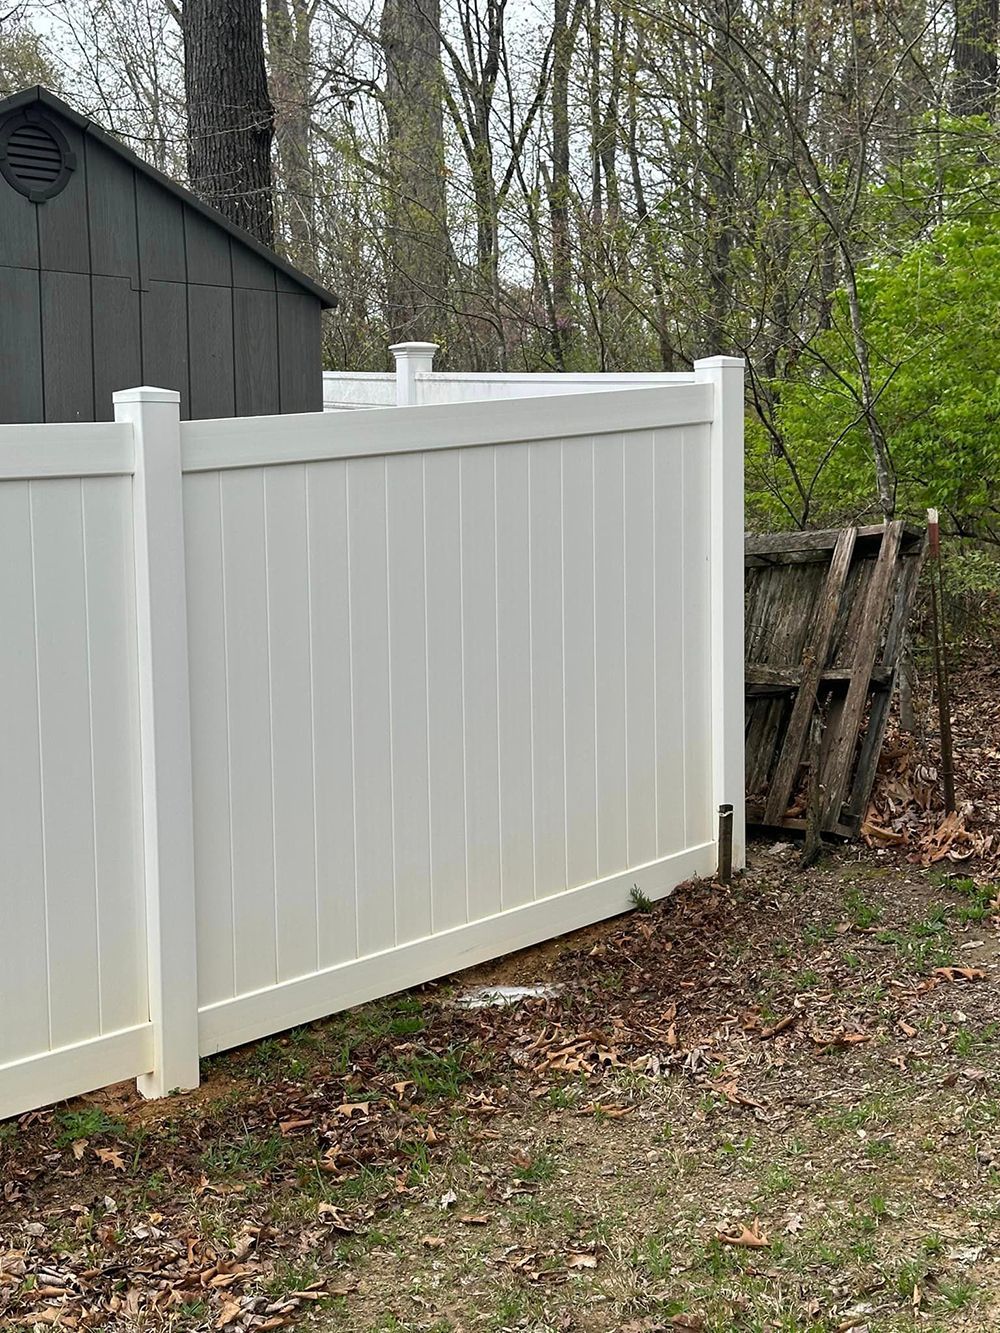 A white fence is sitting in the middle of a yard next to a shed